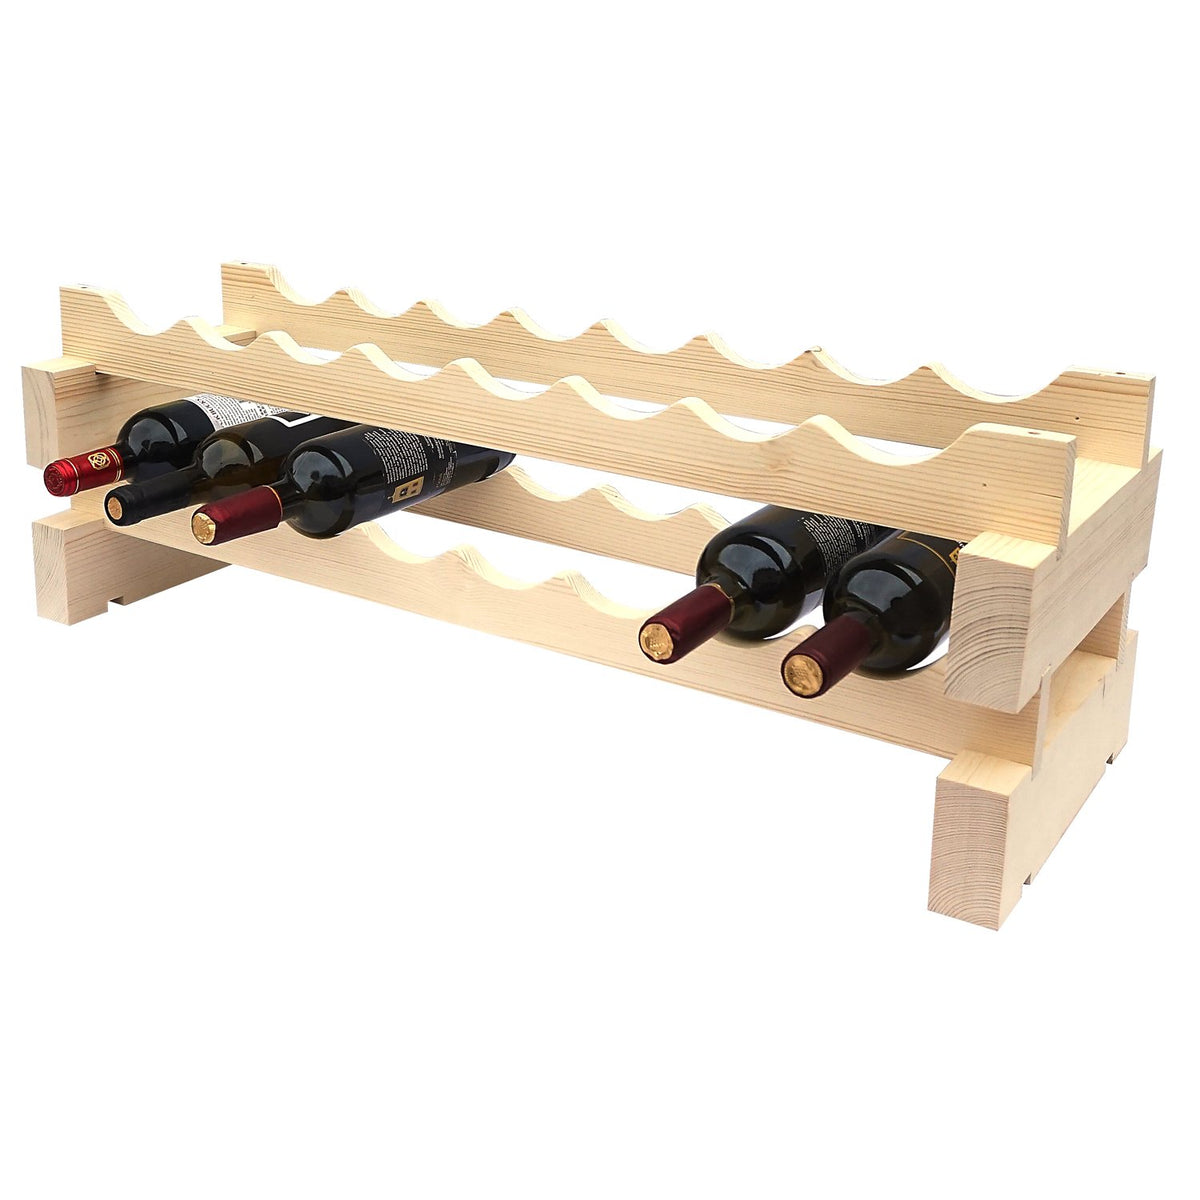 8 Bottle Modular Wine Rack Kit - New Zealand Pine - Two Layers - Side View with 5 Bottles